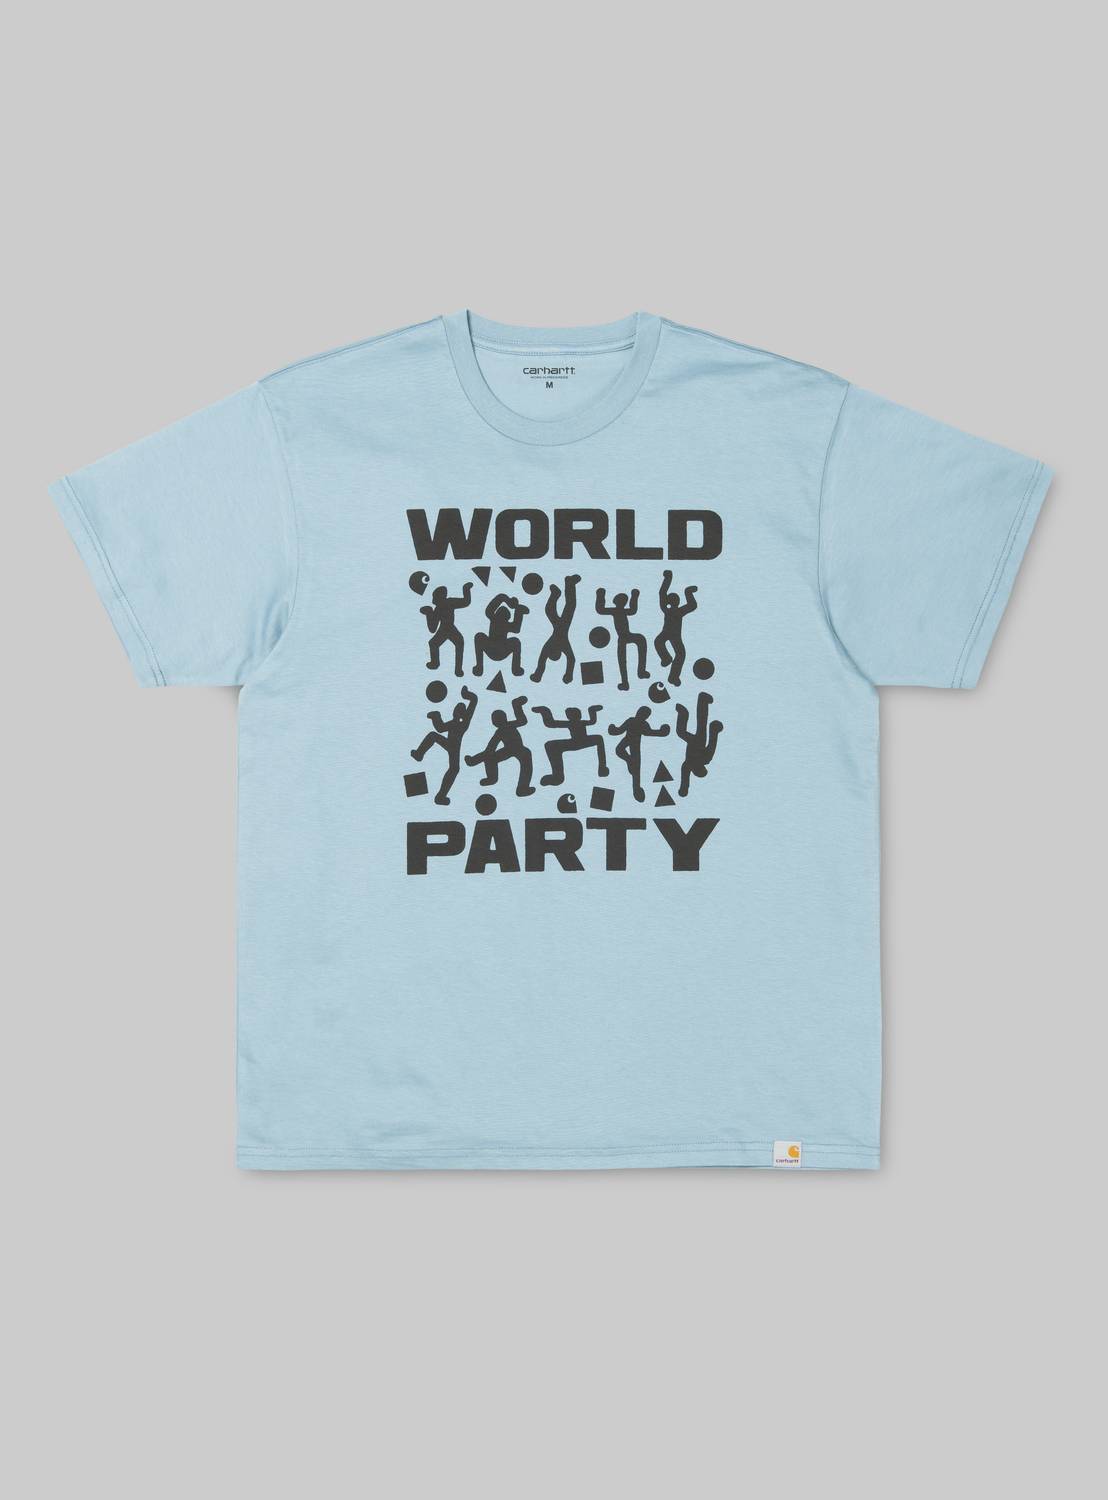 World Party Day tshirt